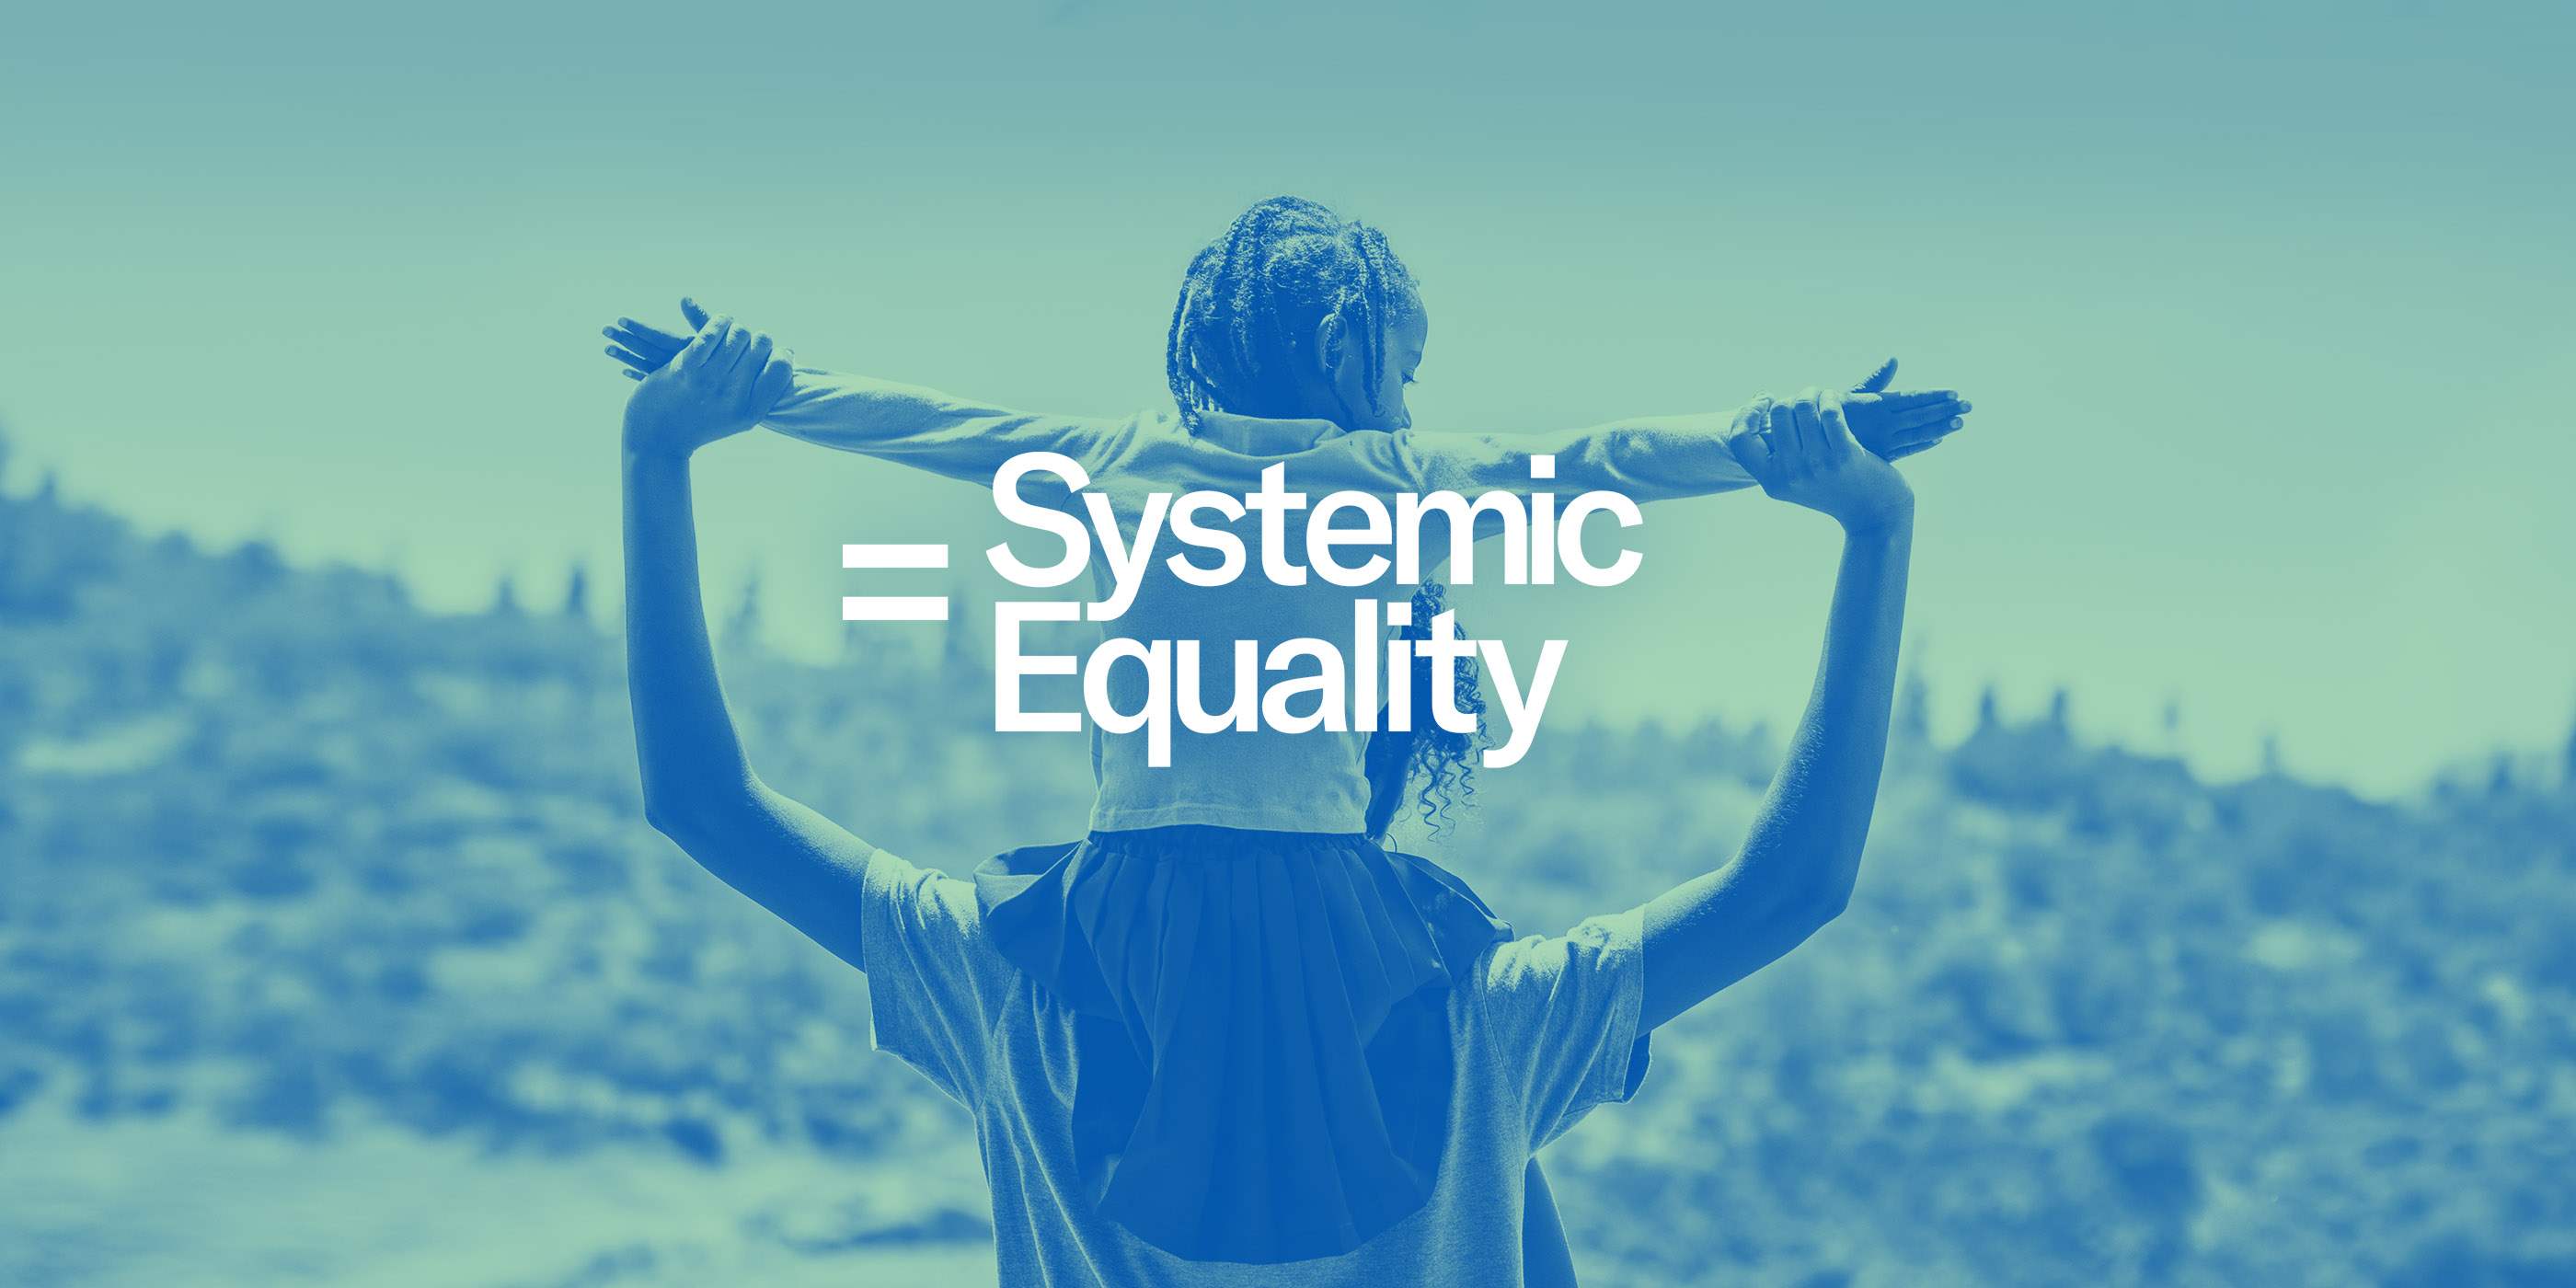 Child sitting on parent's shoulders, with the words "=Systemic Equality".